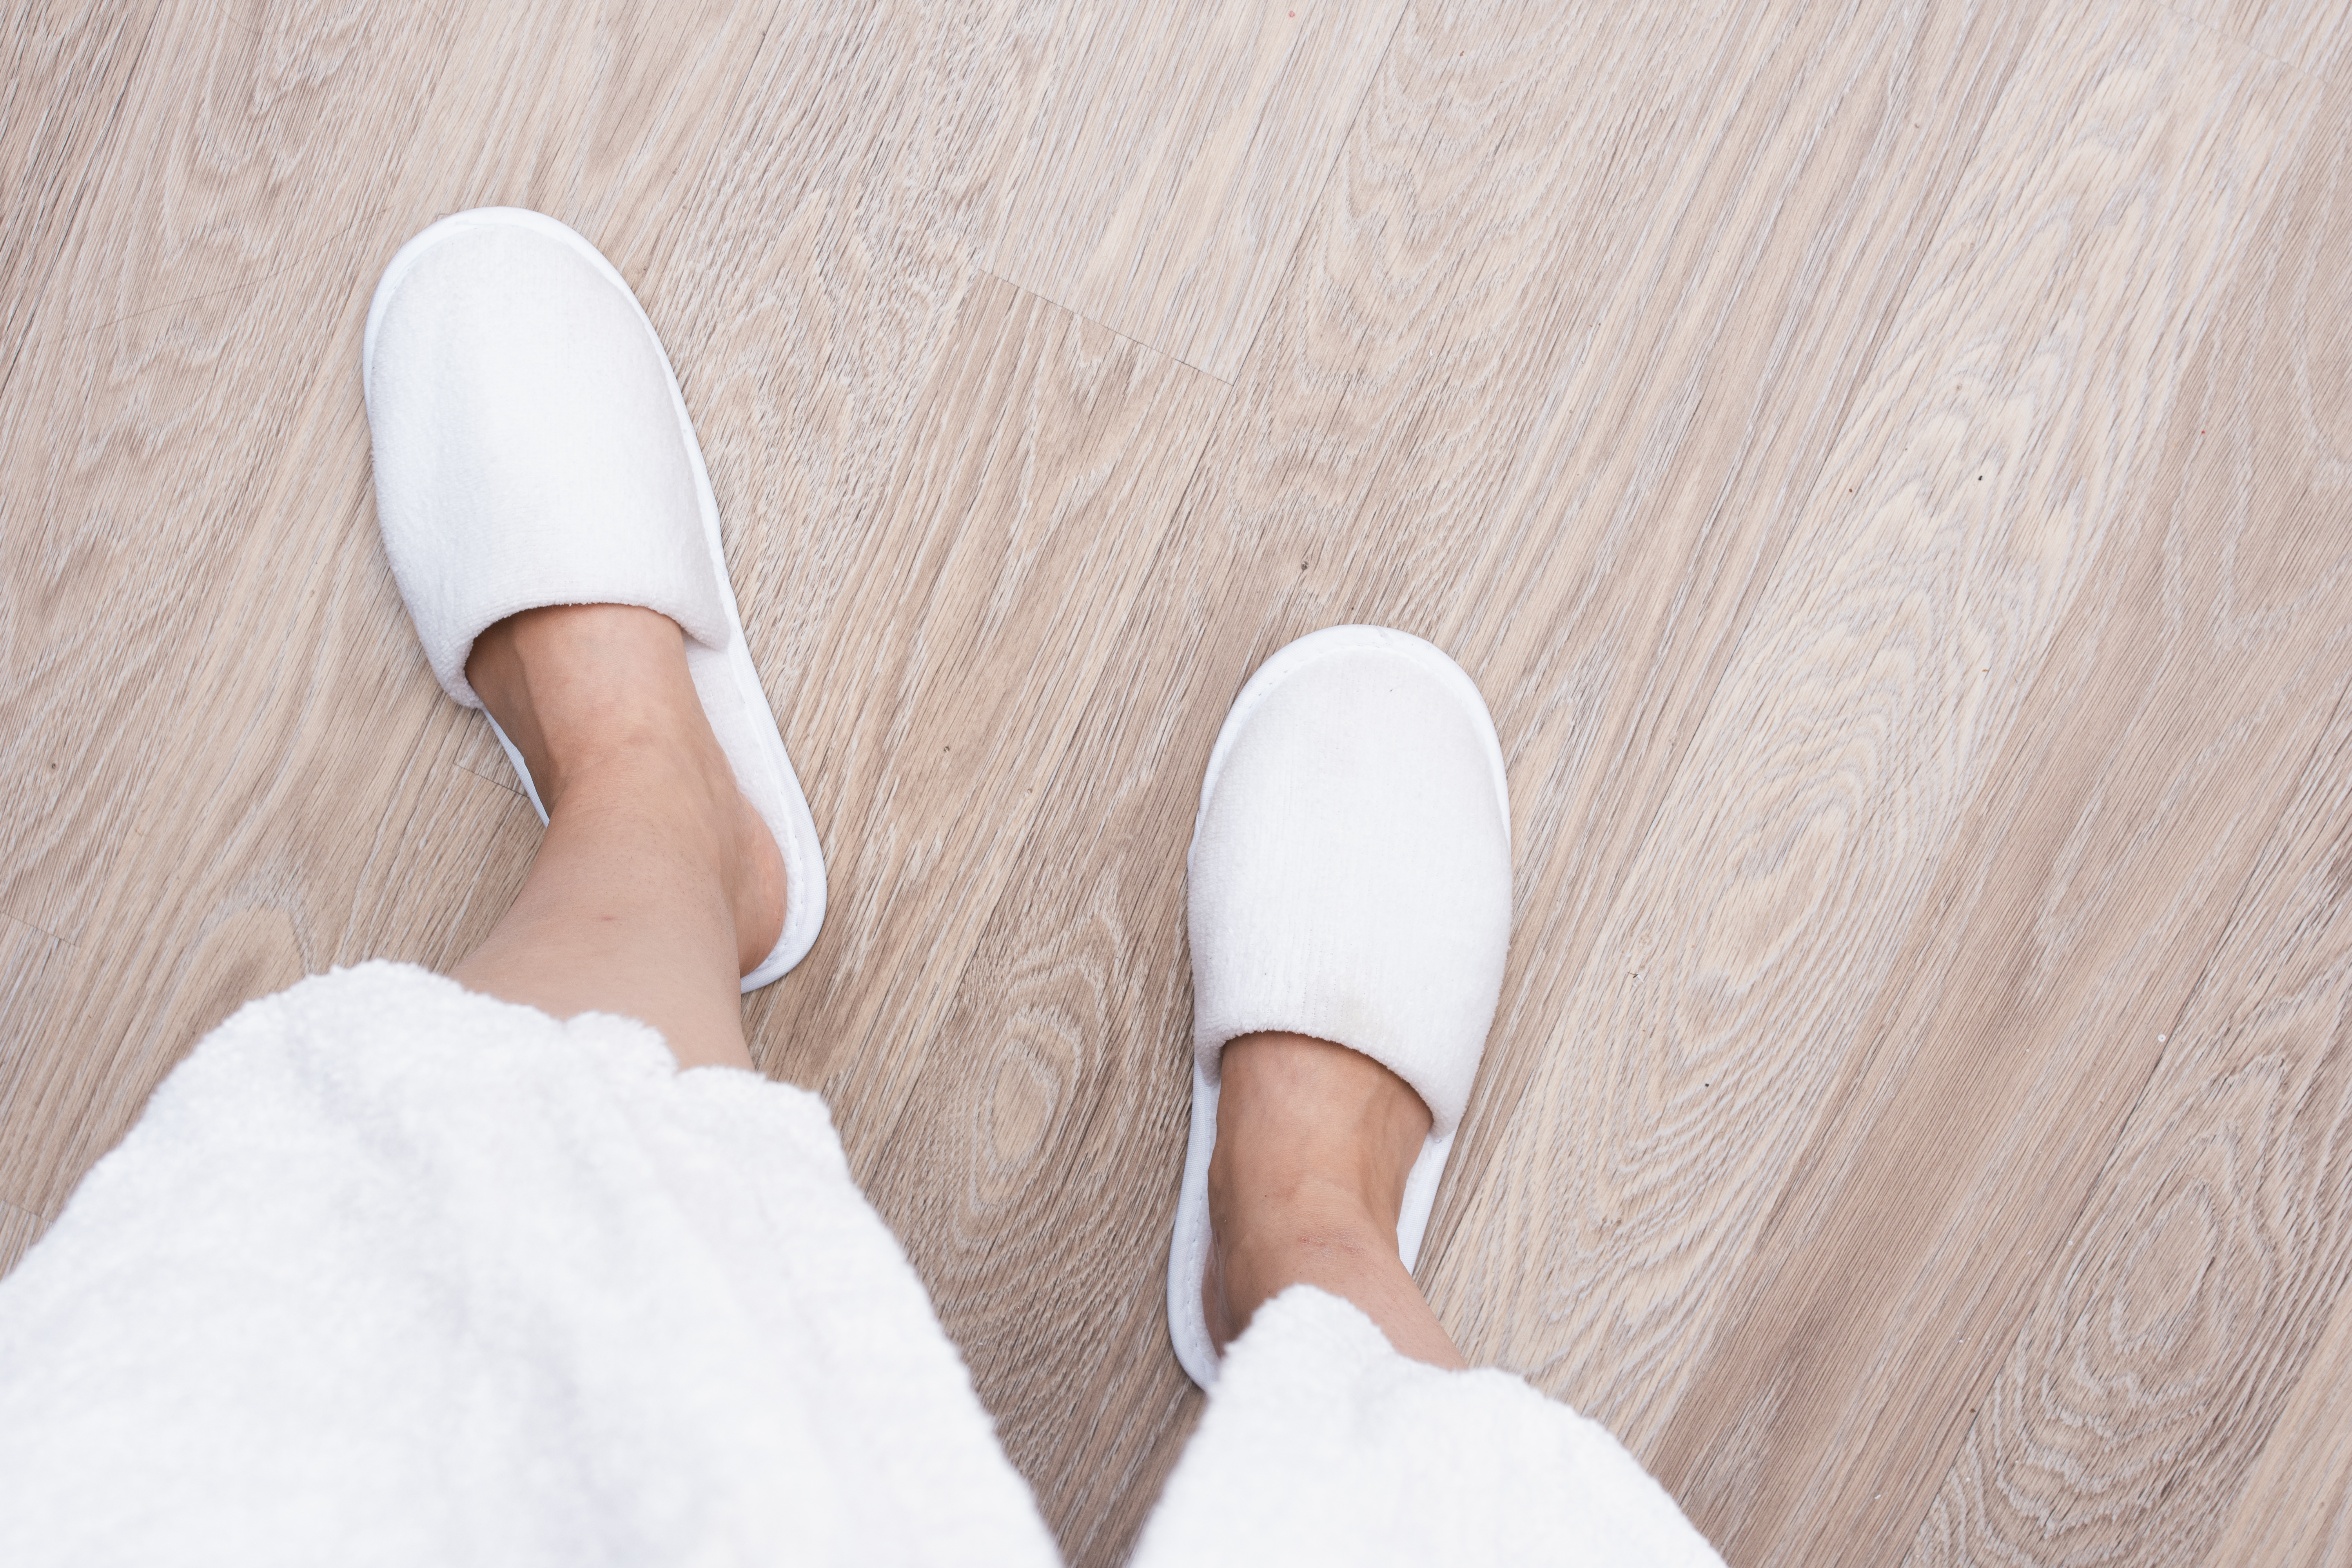 close-up-person-with-white-shoes-wooden-floor